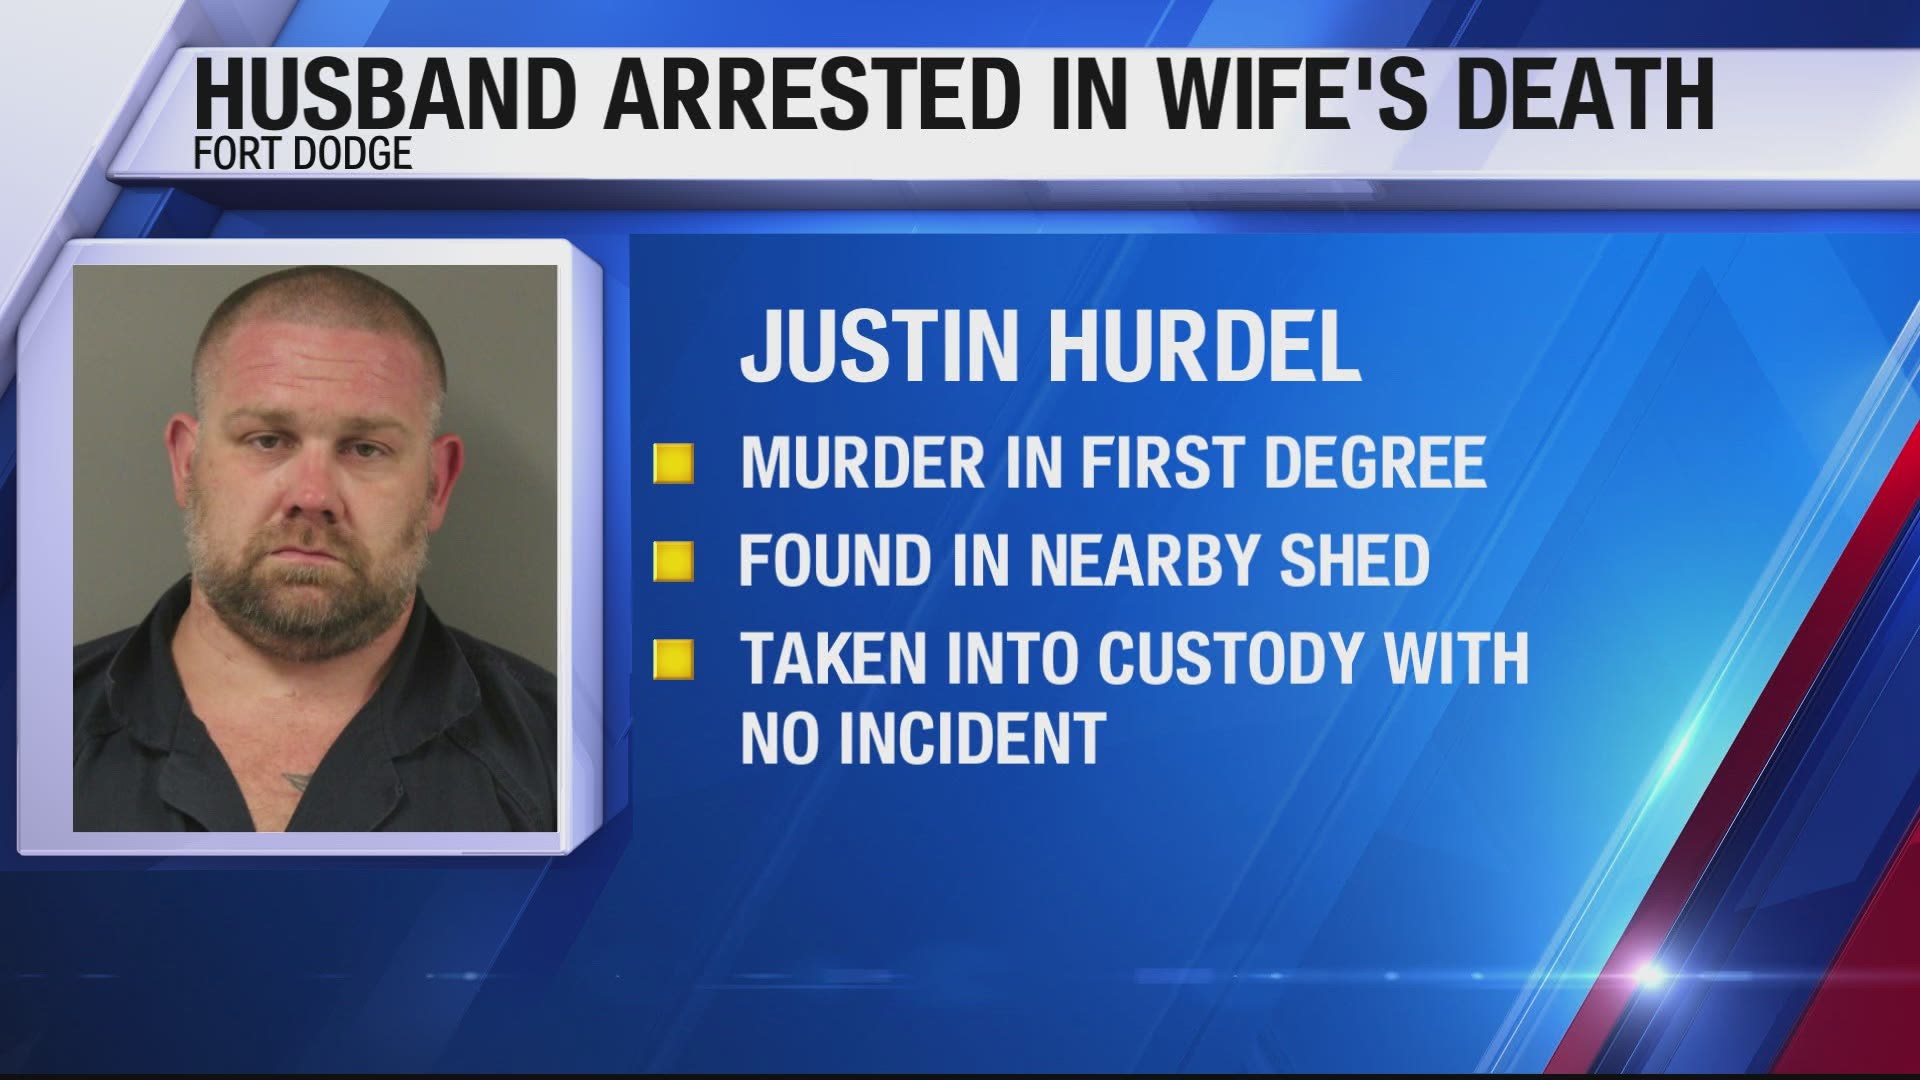 43-year-old Justin Hurdel was arrested Thursday morning for the murder of his wife.